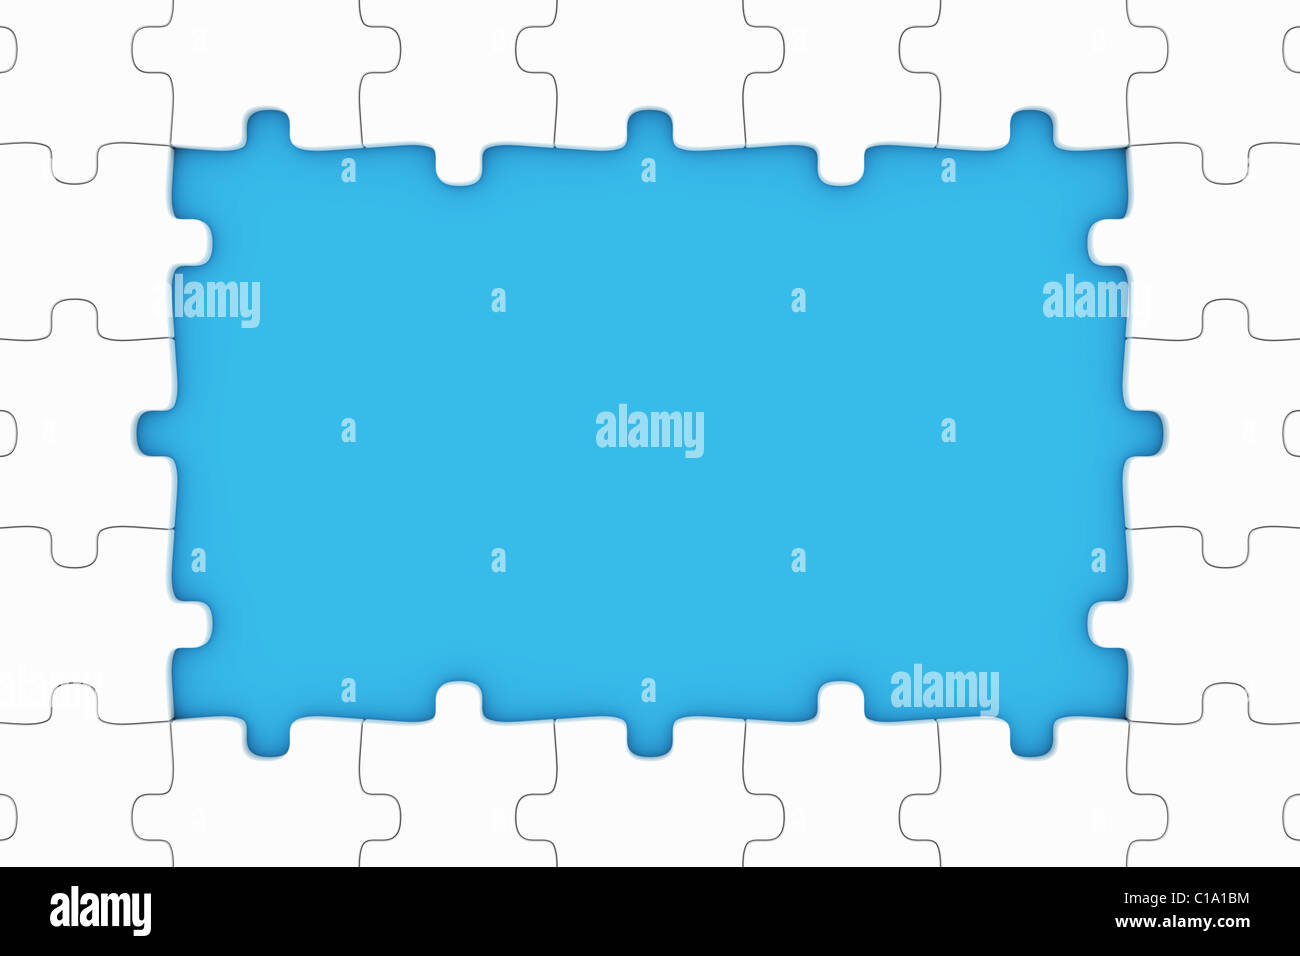 Puzzle pieces frame Stock Photo